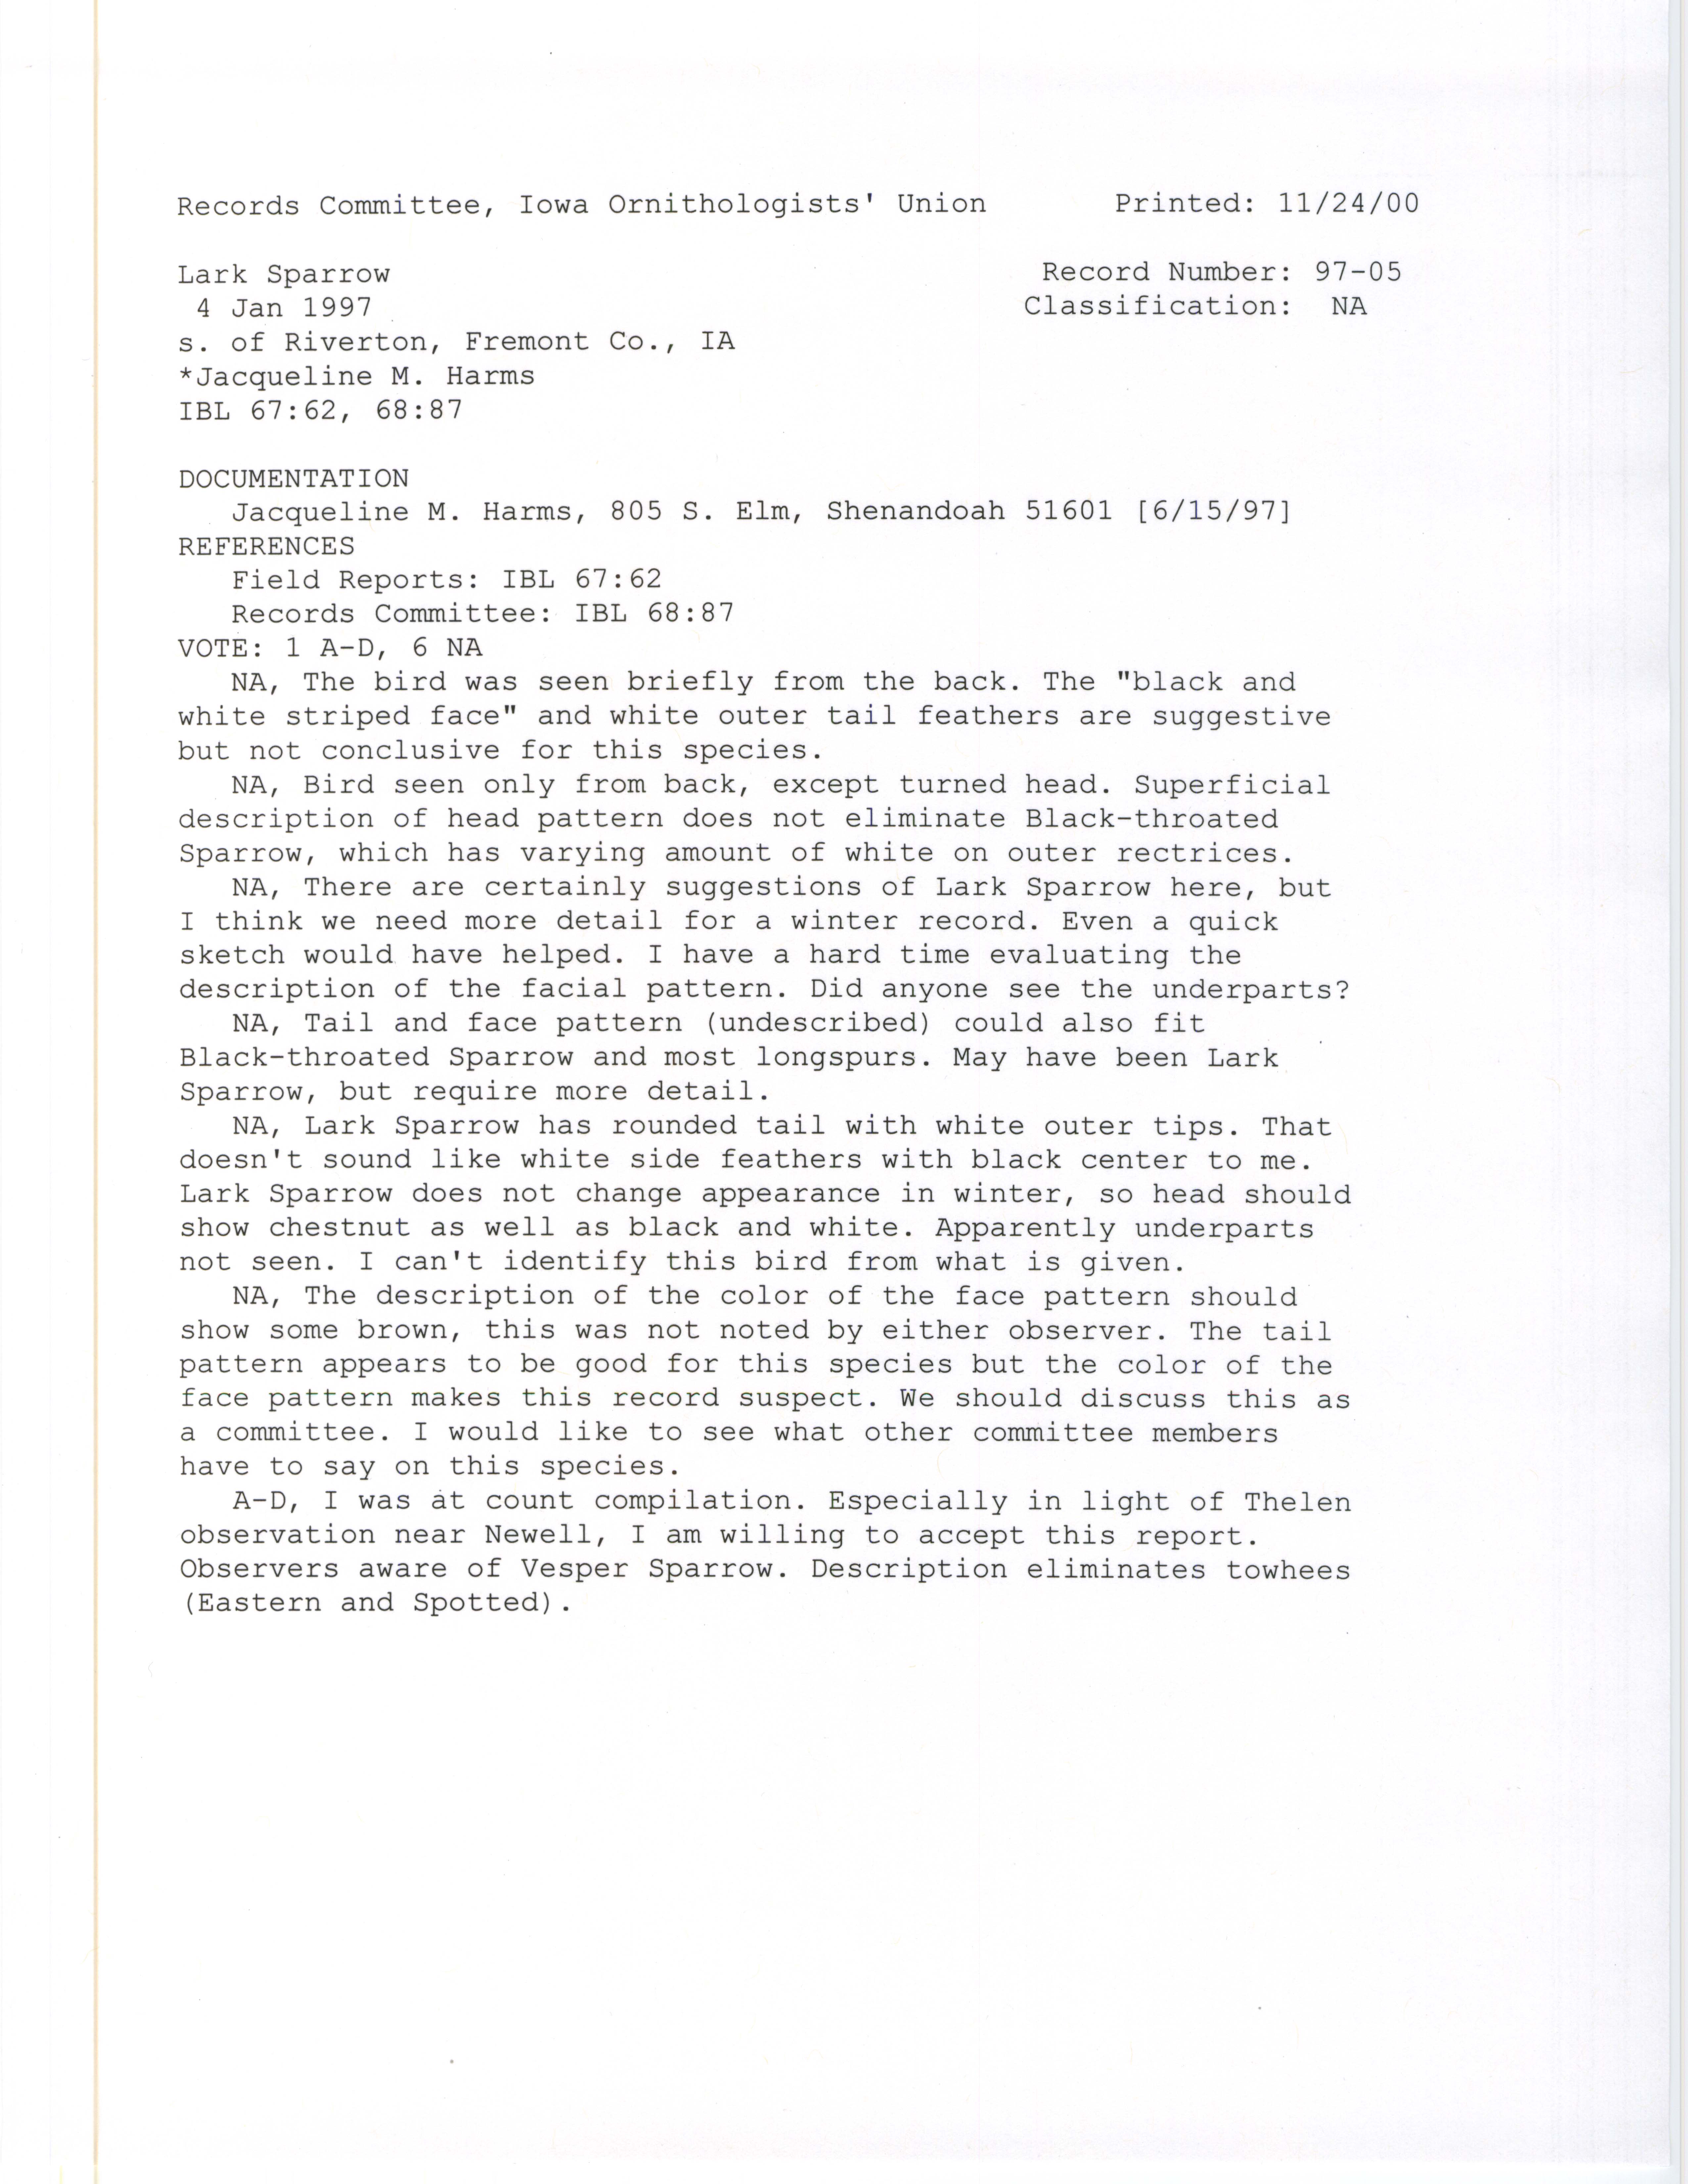 Records Committee review for rare bird sighting for Lark Sparrow south of Riverton, 1997